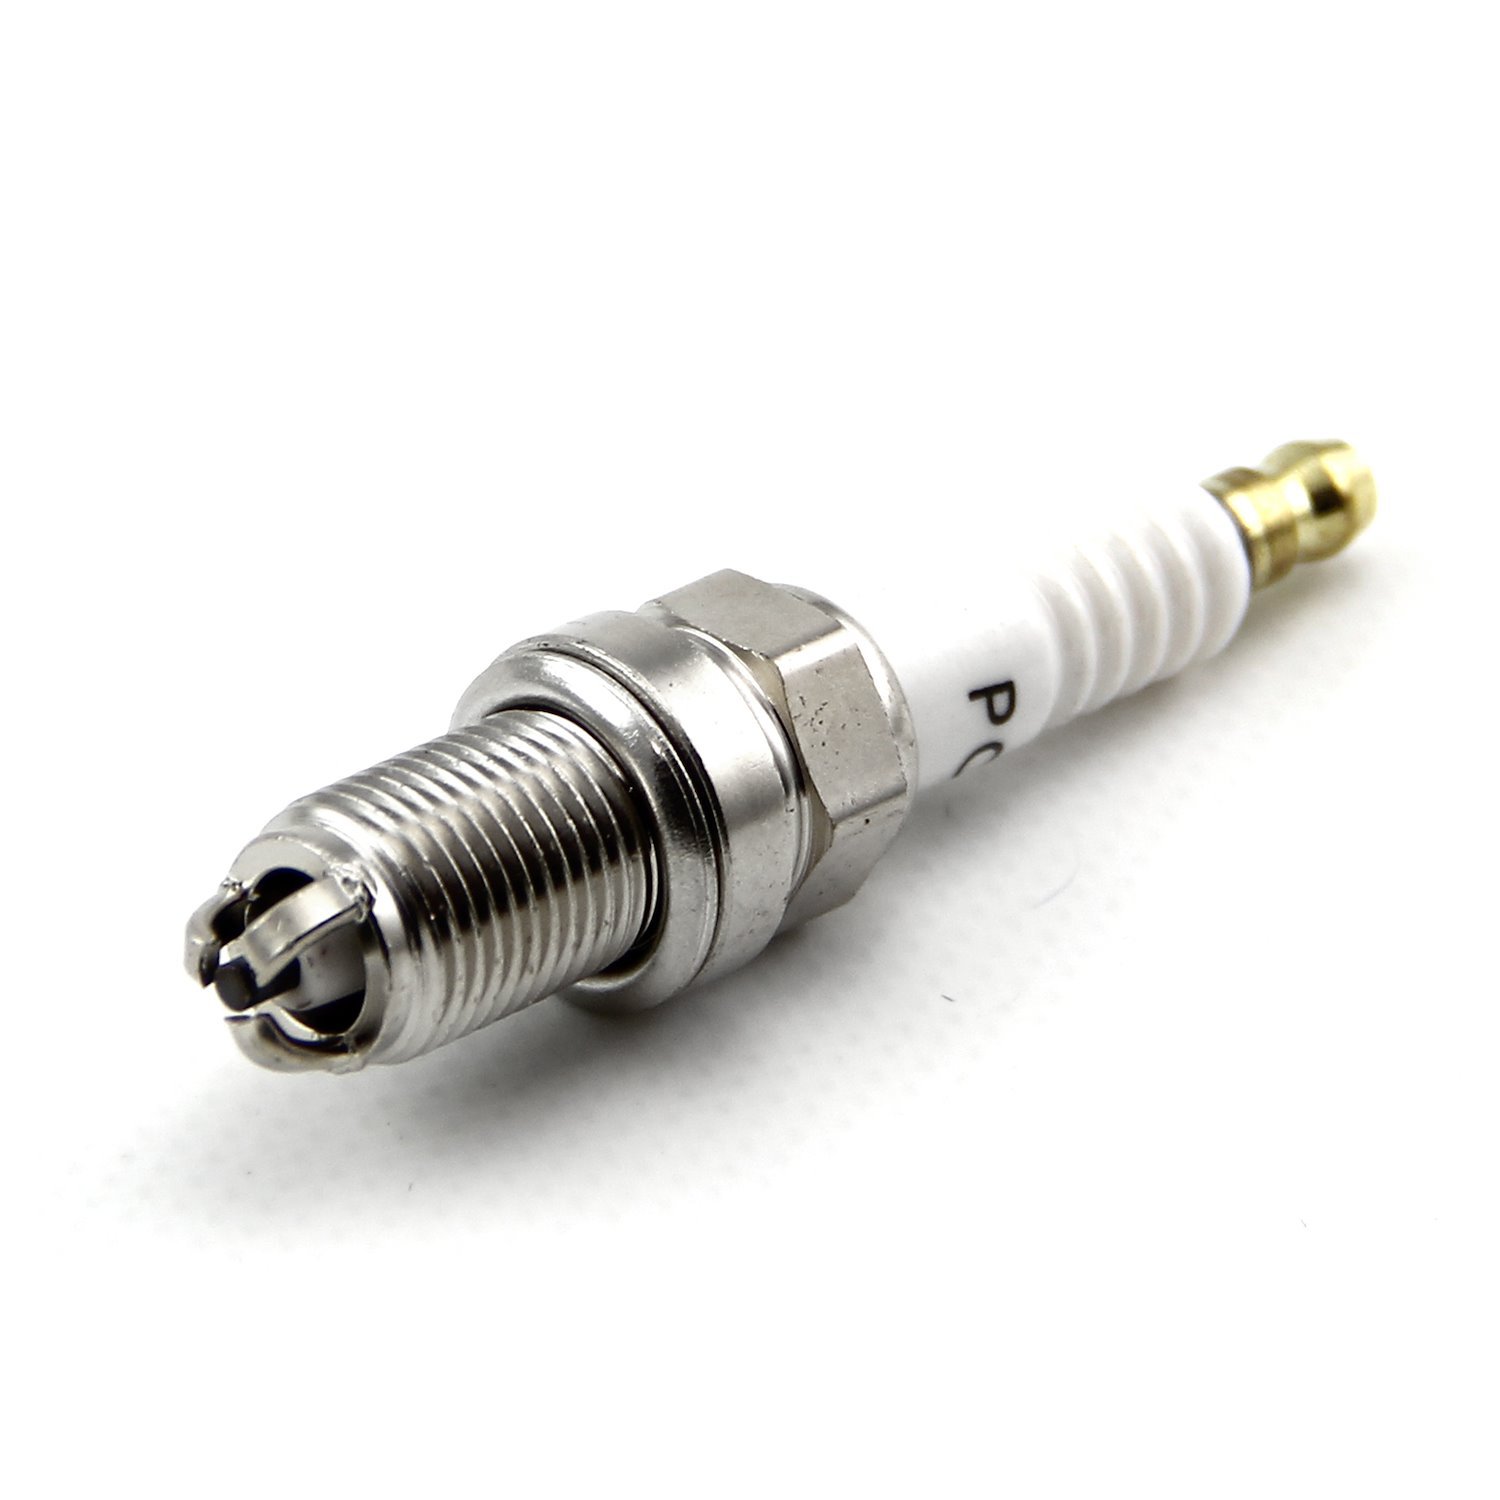 3 Prong Spark Plug Replaces Bpses